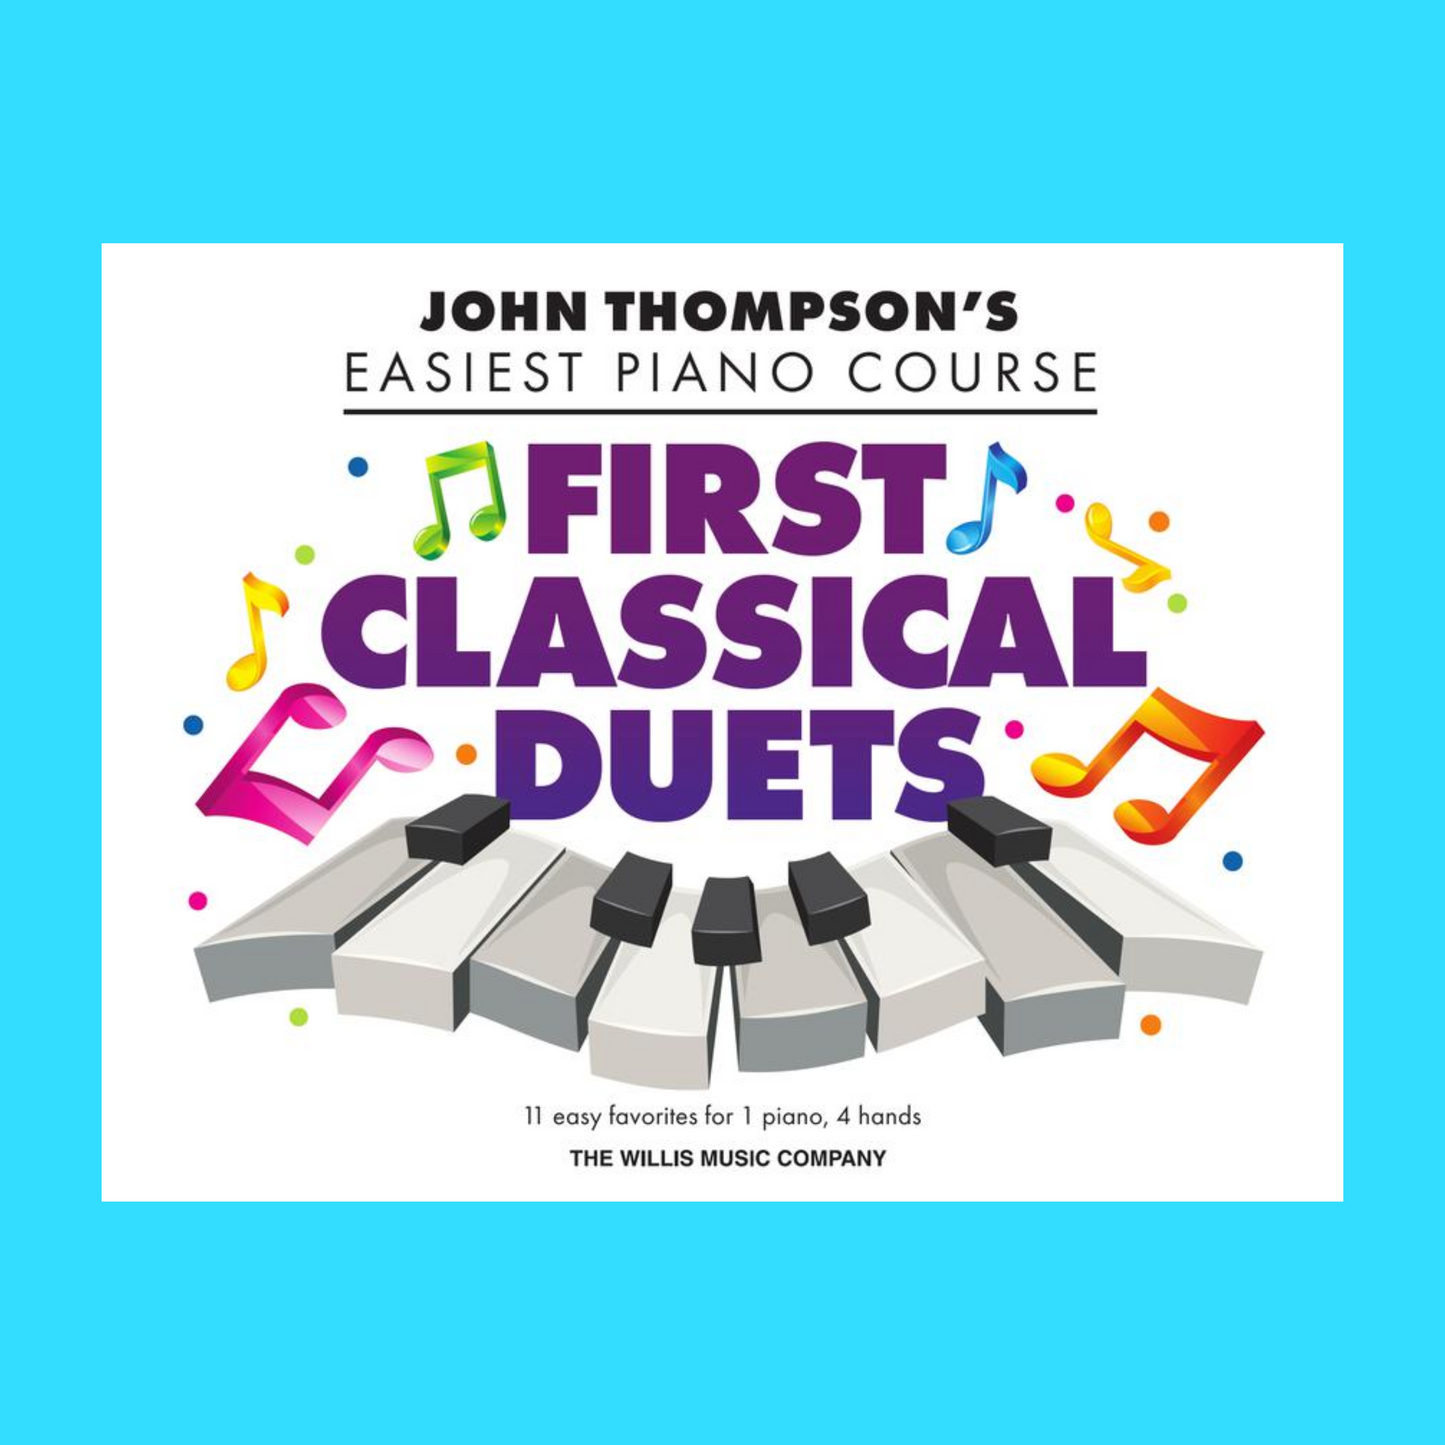 John Thompson's Easiest Piano Course - First Classical Duets Book